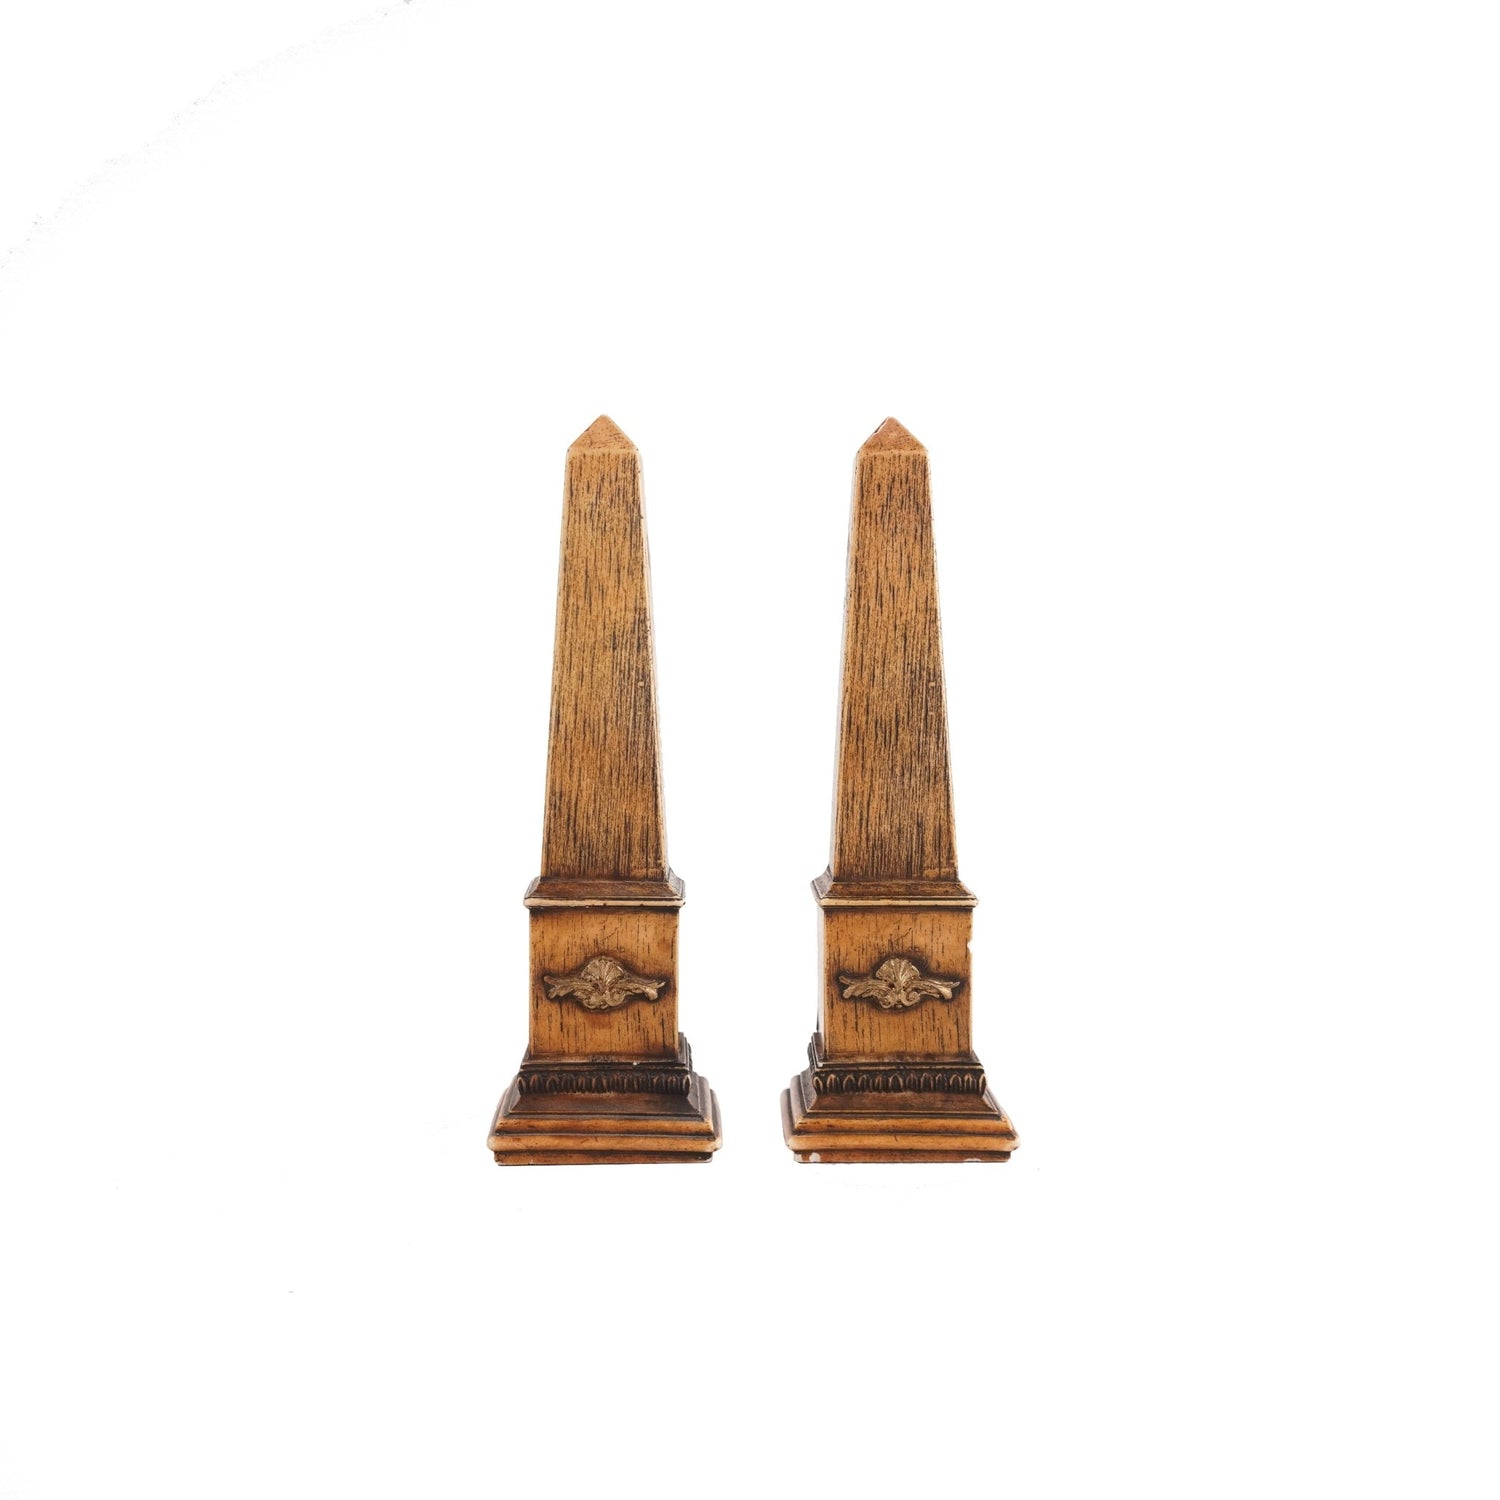 Pair of Wooden Obelisk - Sirdab - Unknown